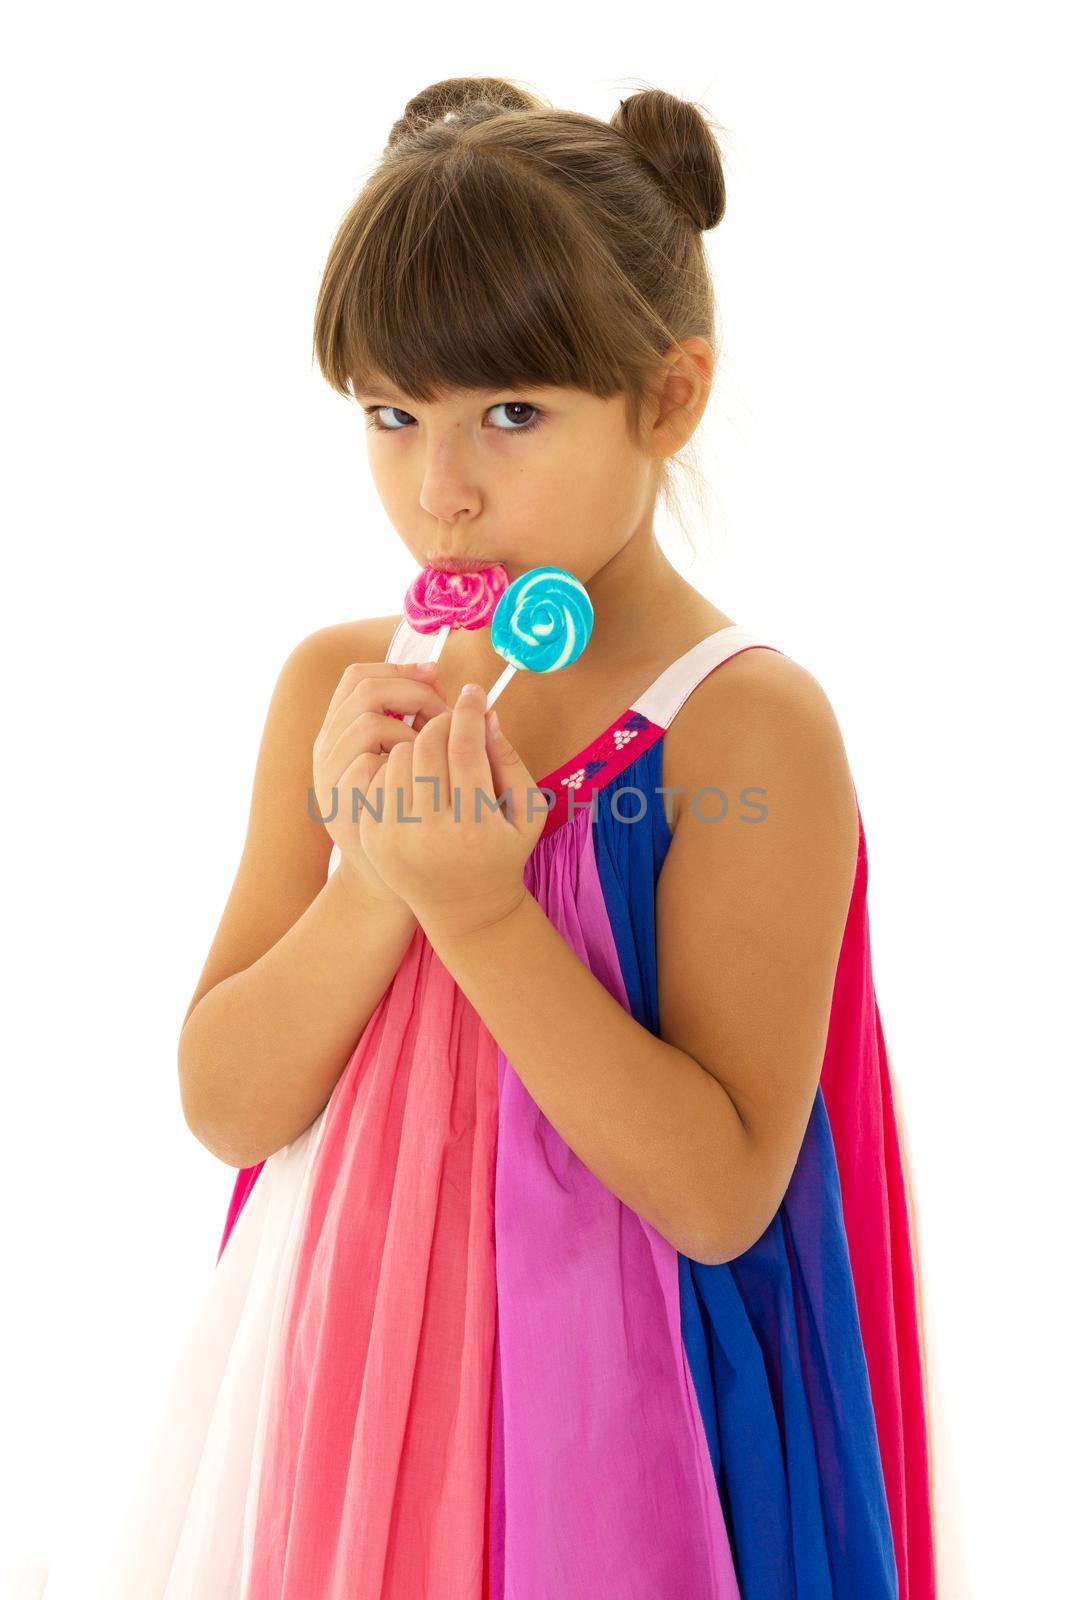 Pretty girl posing with lollipops. Lovely girl in bright summer dress posing in studio on isolated white background. Portrait of cute preteen child having fun with lollipops